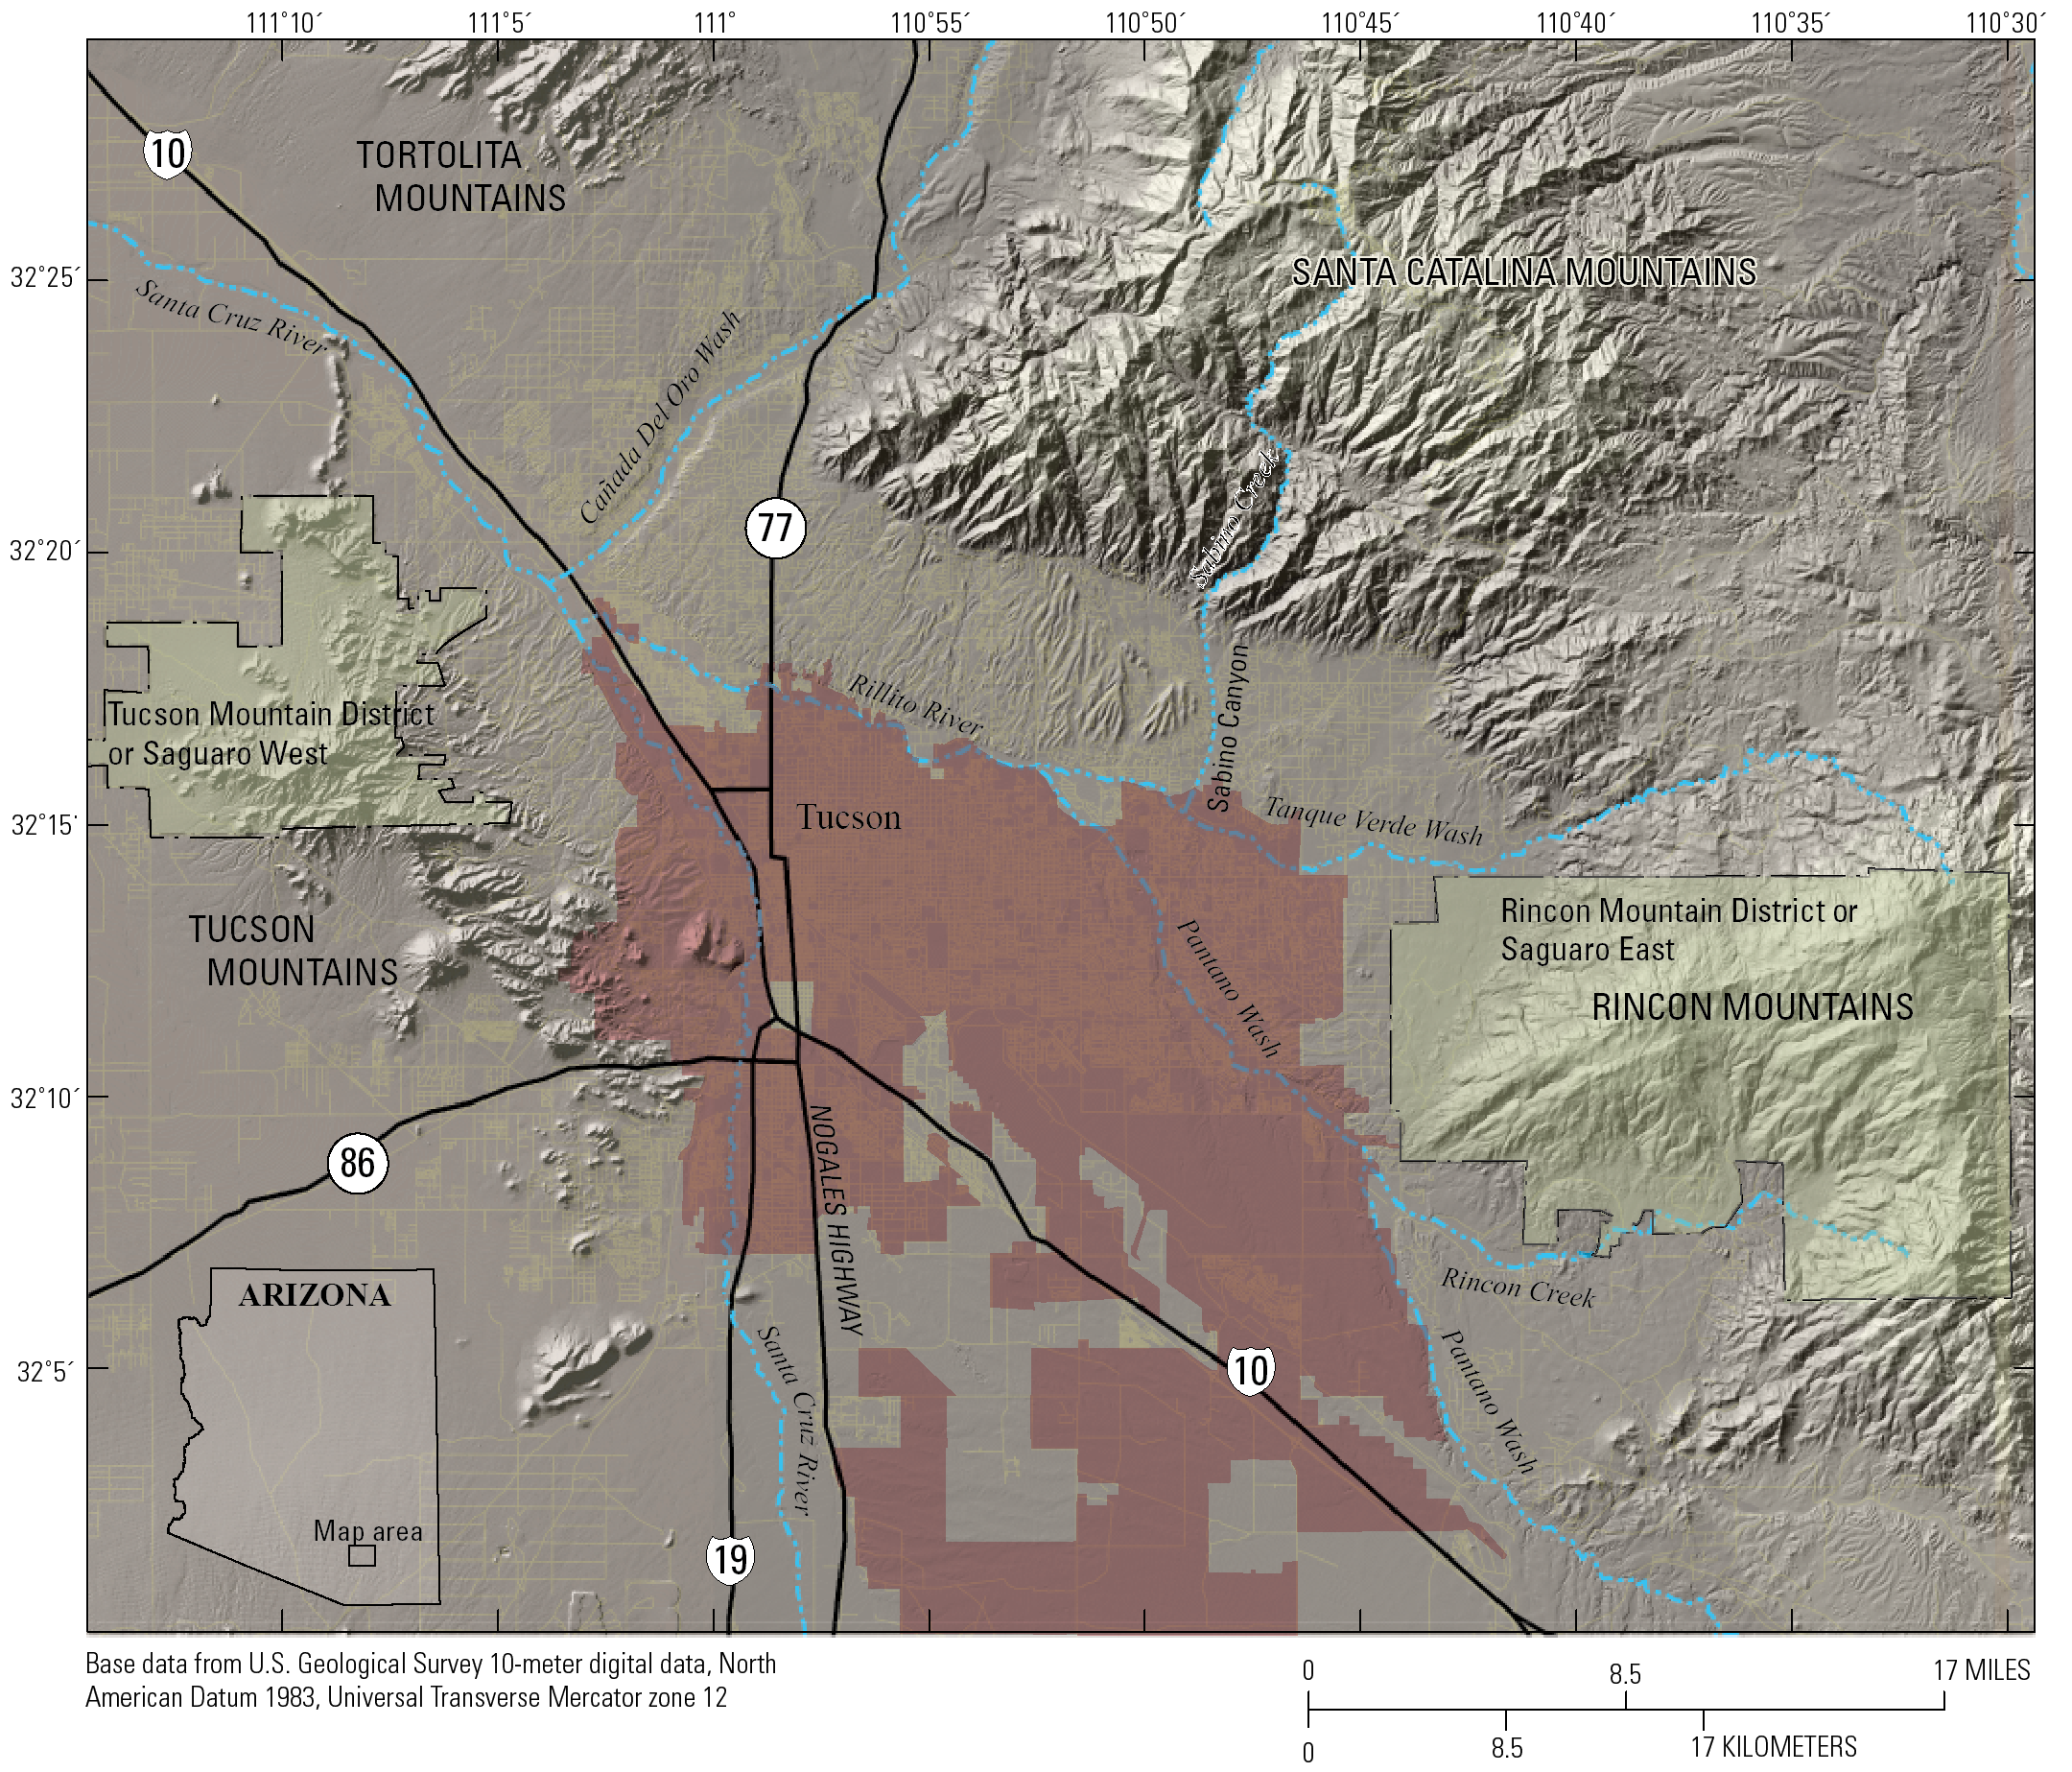 Map of Tucson, Arizona, surrounding mountain ranges, major surface-water drainages,
                     and the two districts of Saguaro National Park.